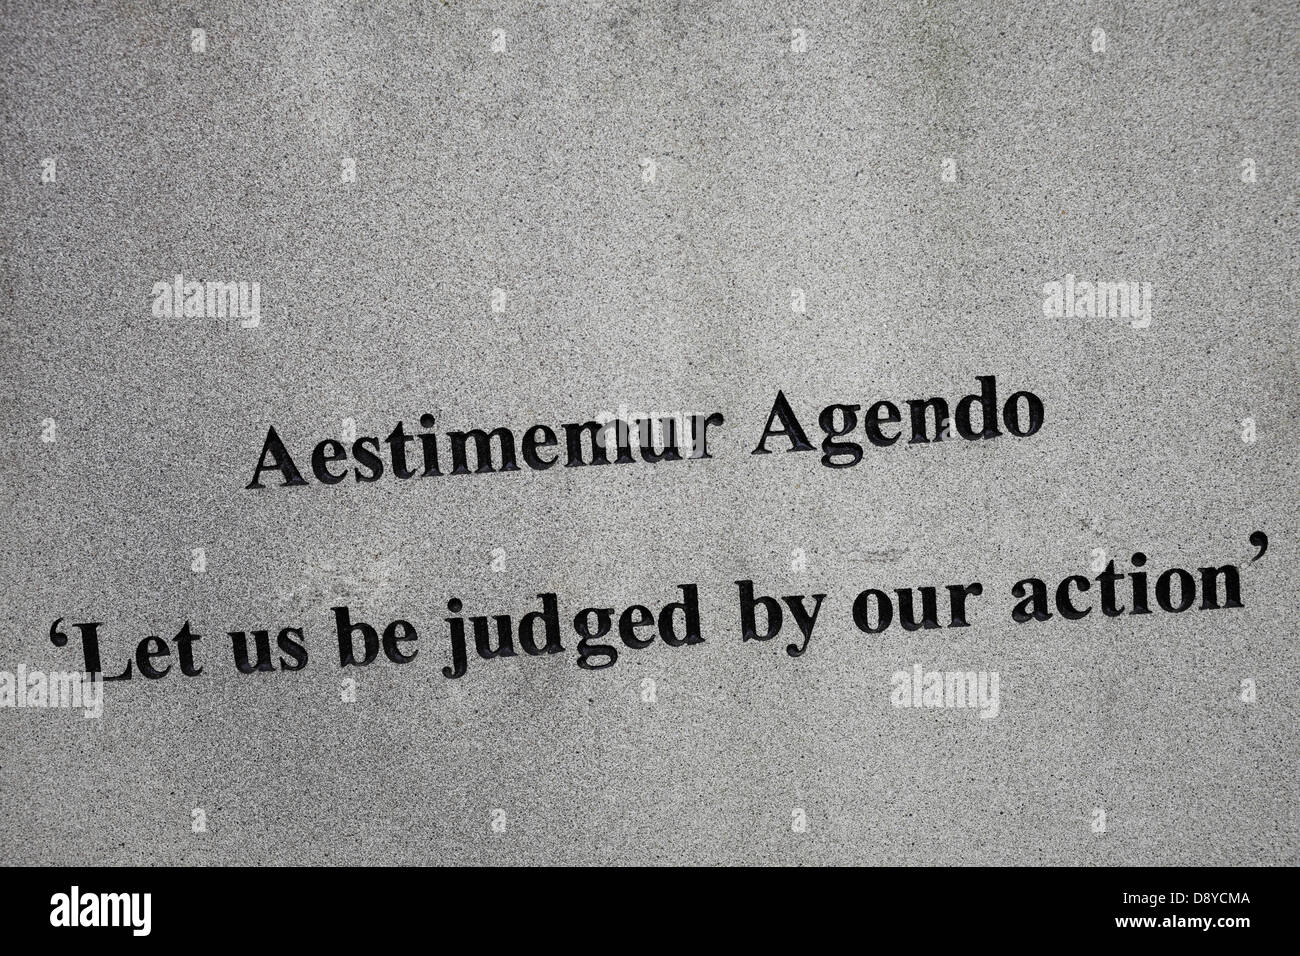 Motto 'Let us be judged by our action' on a headstone. Stock Photo